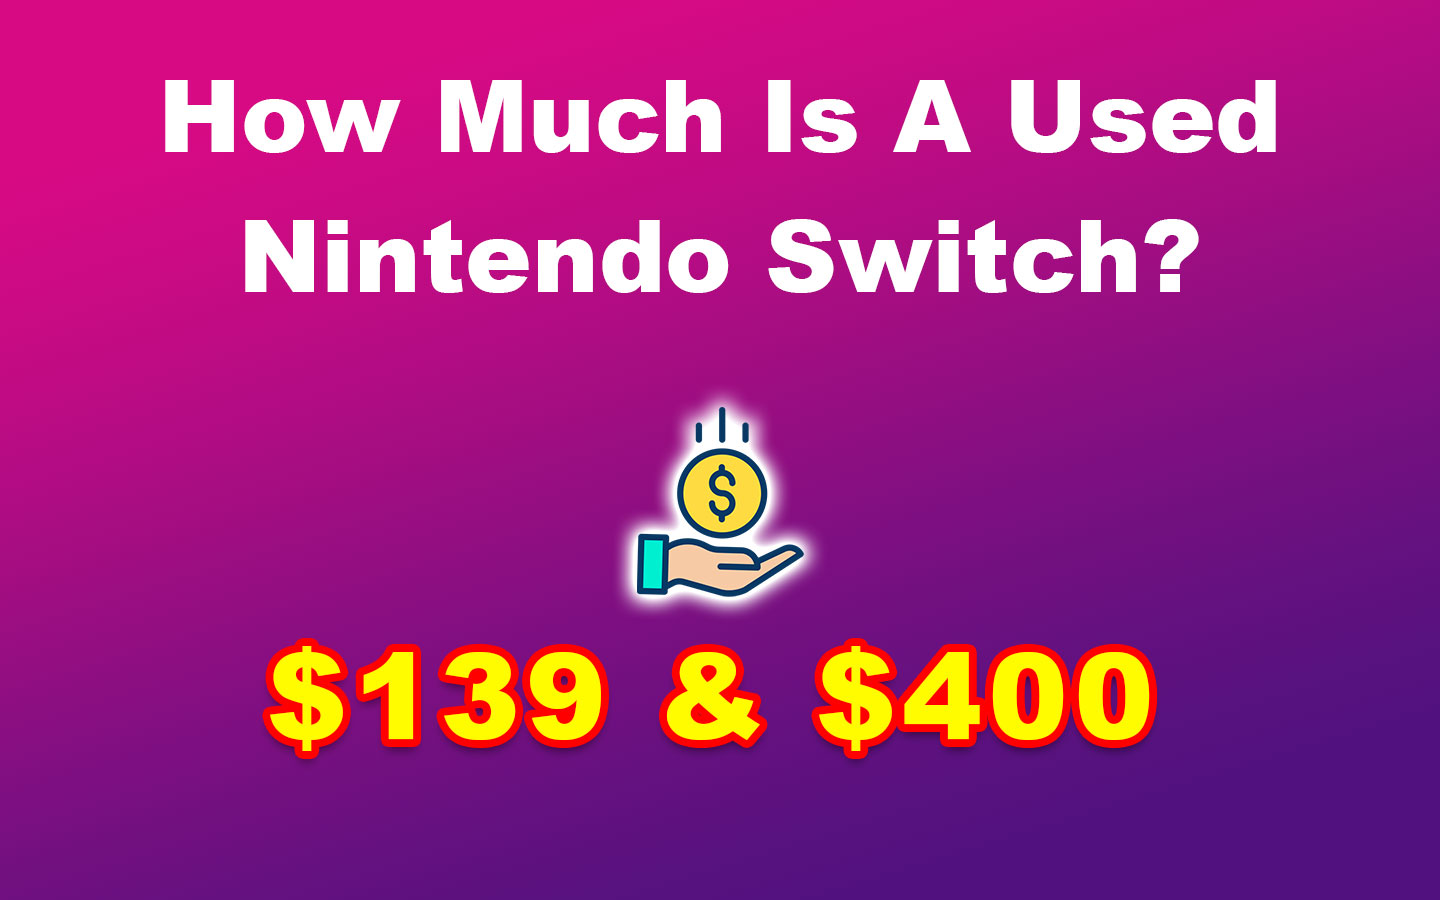 How Much Is A Used Nintendo Switch